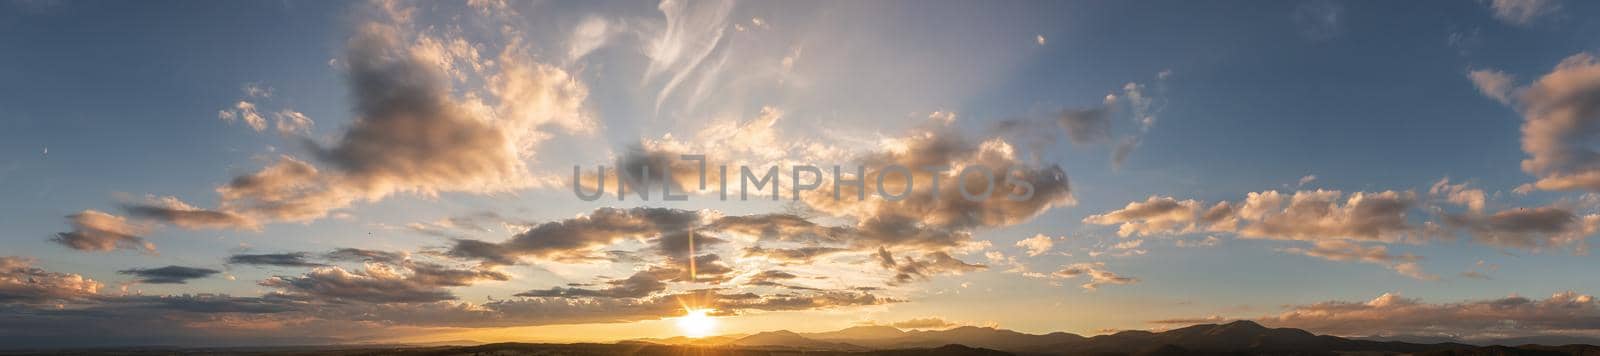 Dramatic clouds and sun in the sky at sunset by EdVal